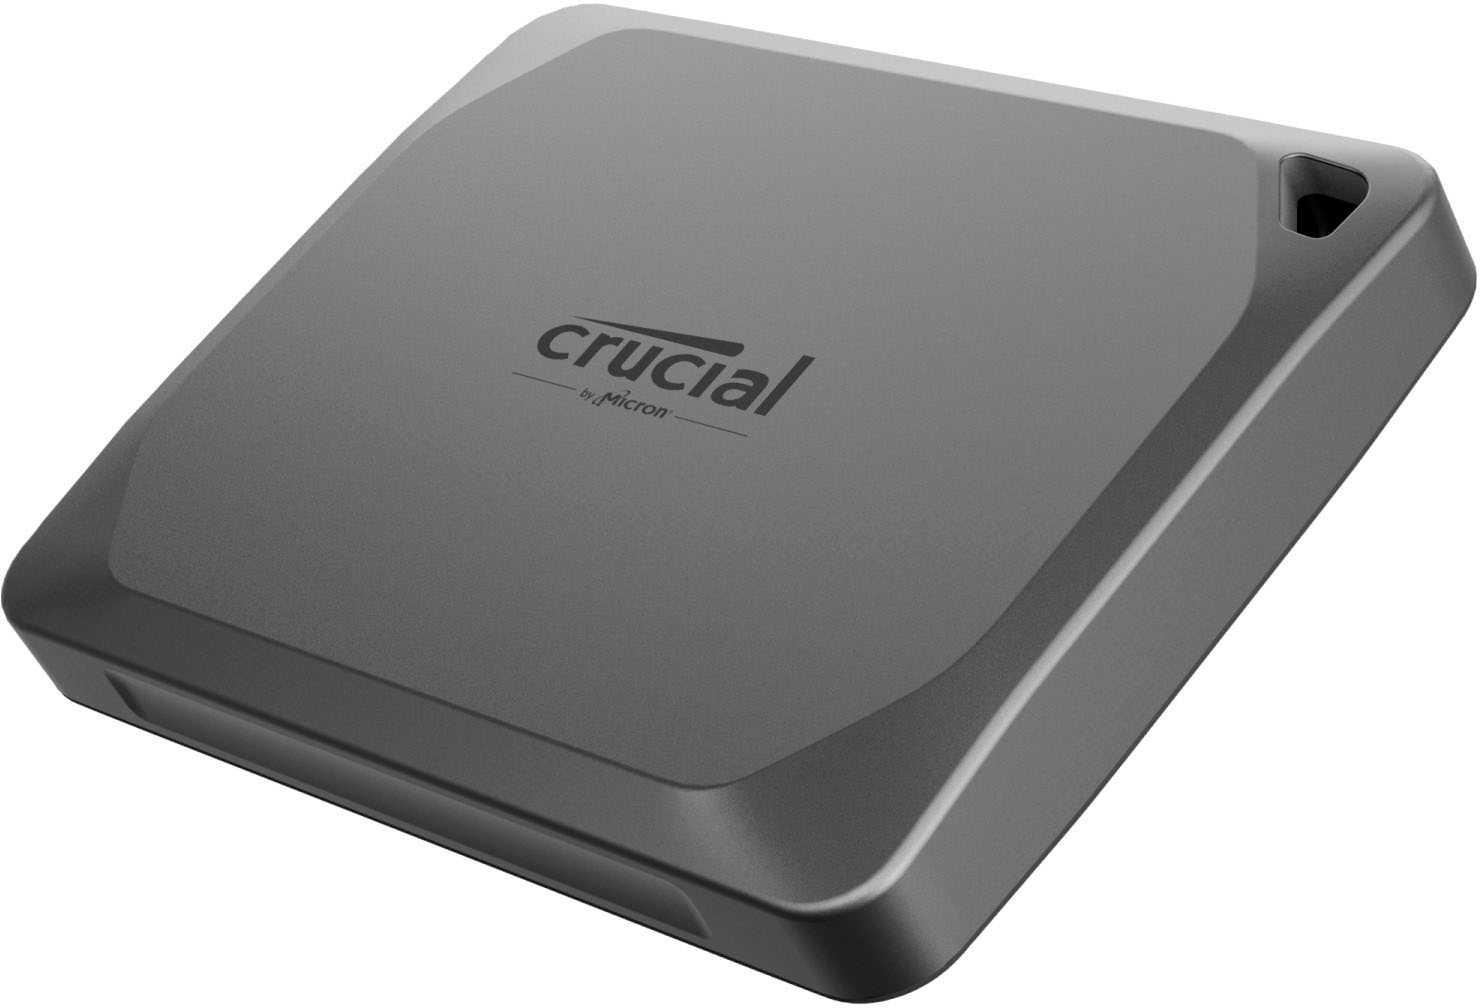 Crucial X9 Pro 4TB Portable SSD | CT4000X9PROSSD9 